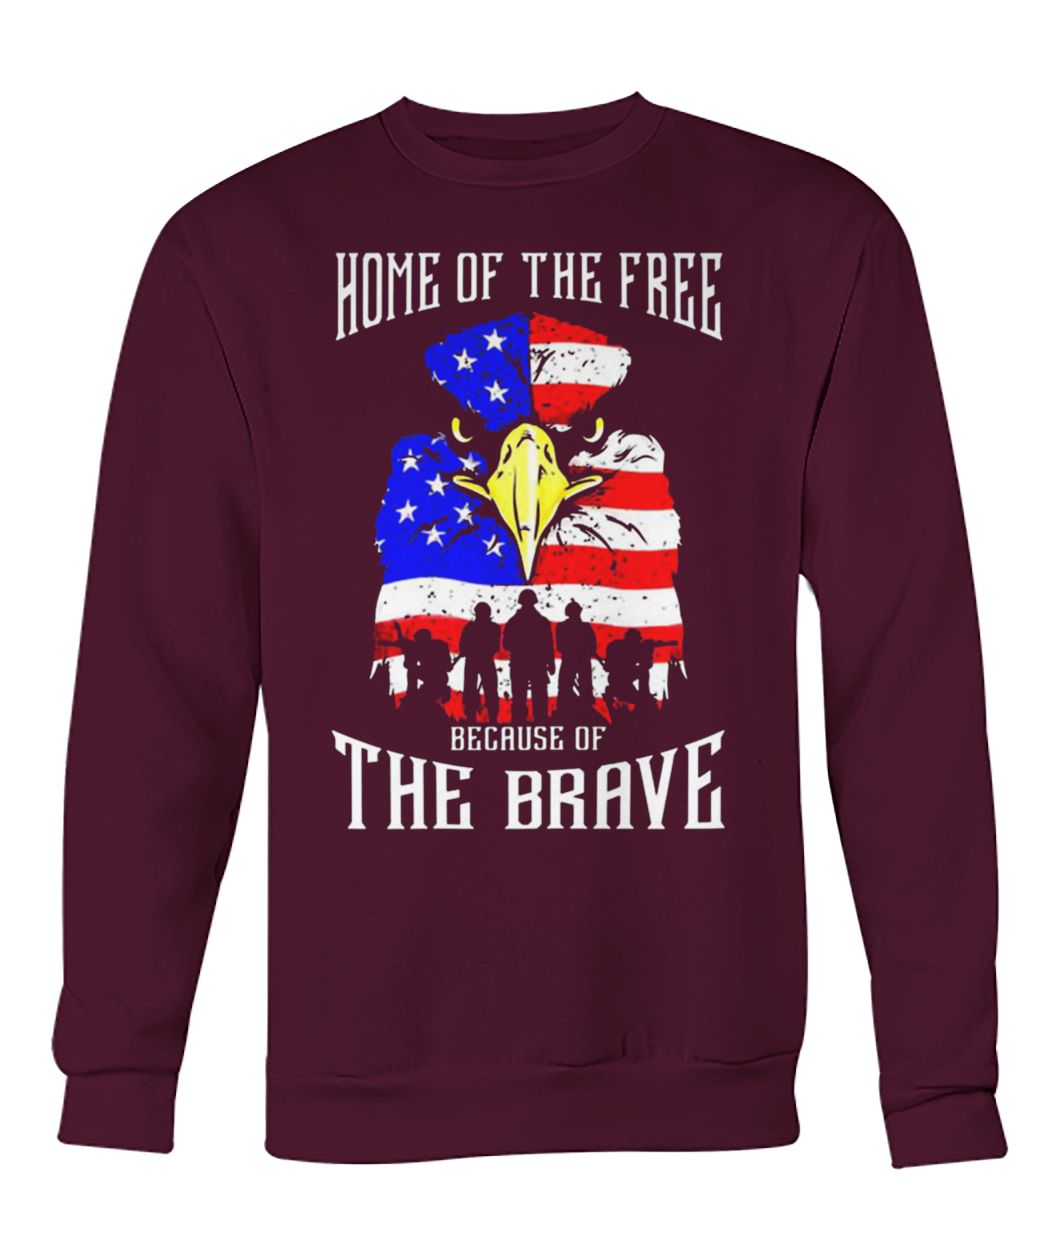 Home of the free because of the brave eagle US flag crew neck sweatshirt